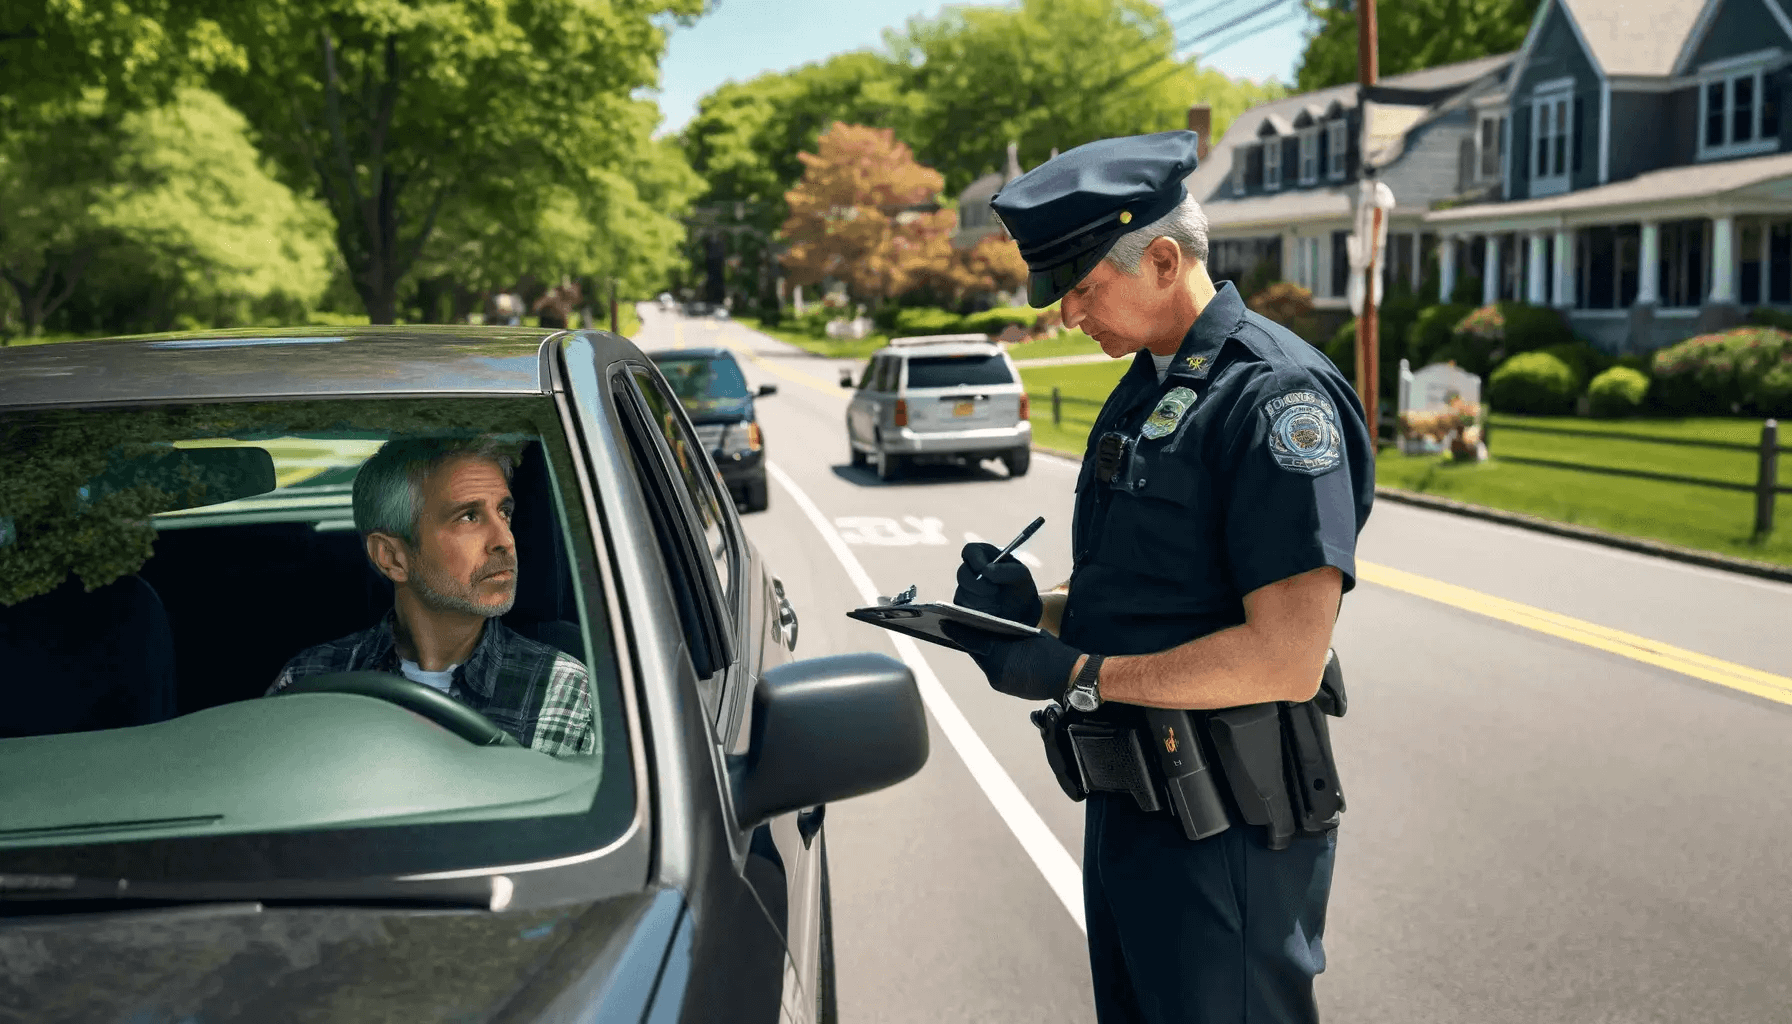 Police officer issuing a Fairfield County speeding ticket to driver